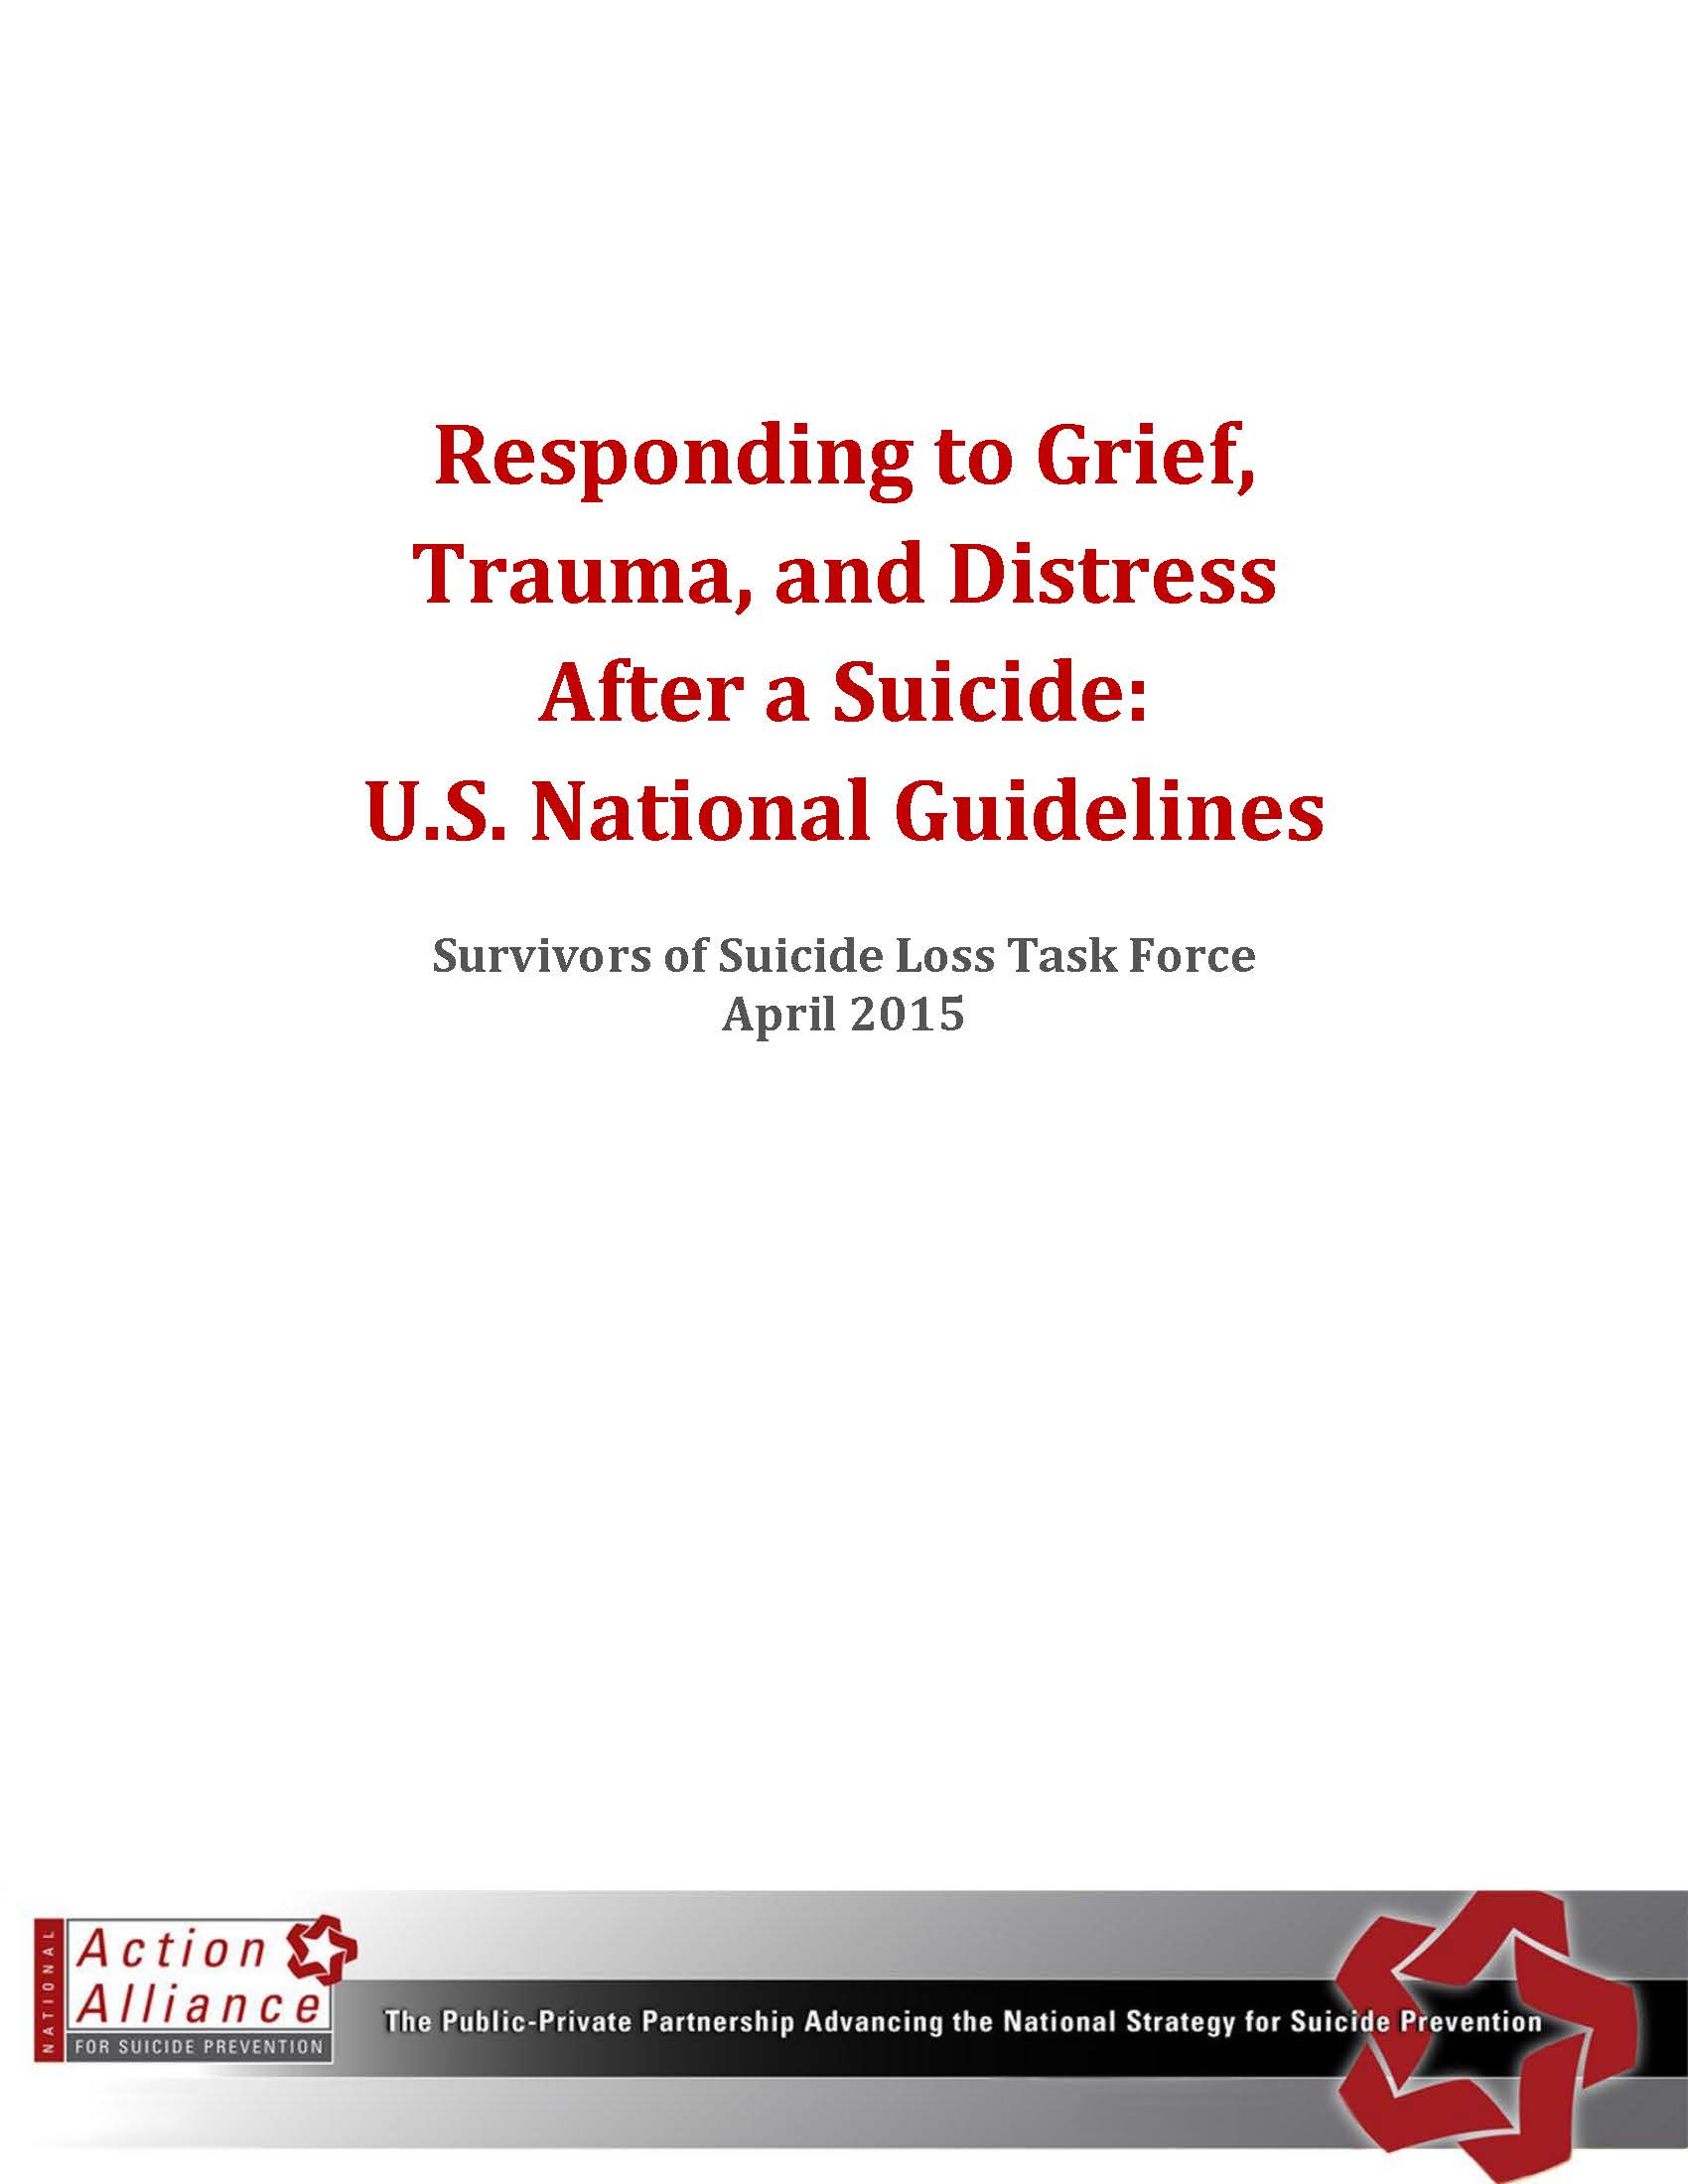 Responding to Grief, Trauma, and Distress After a Suicide: U.S. National Guidelines